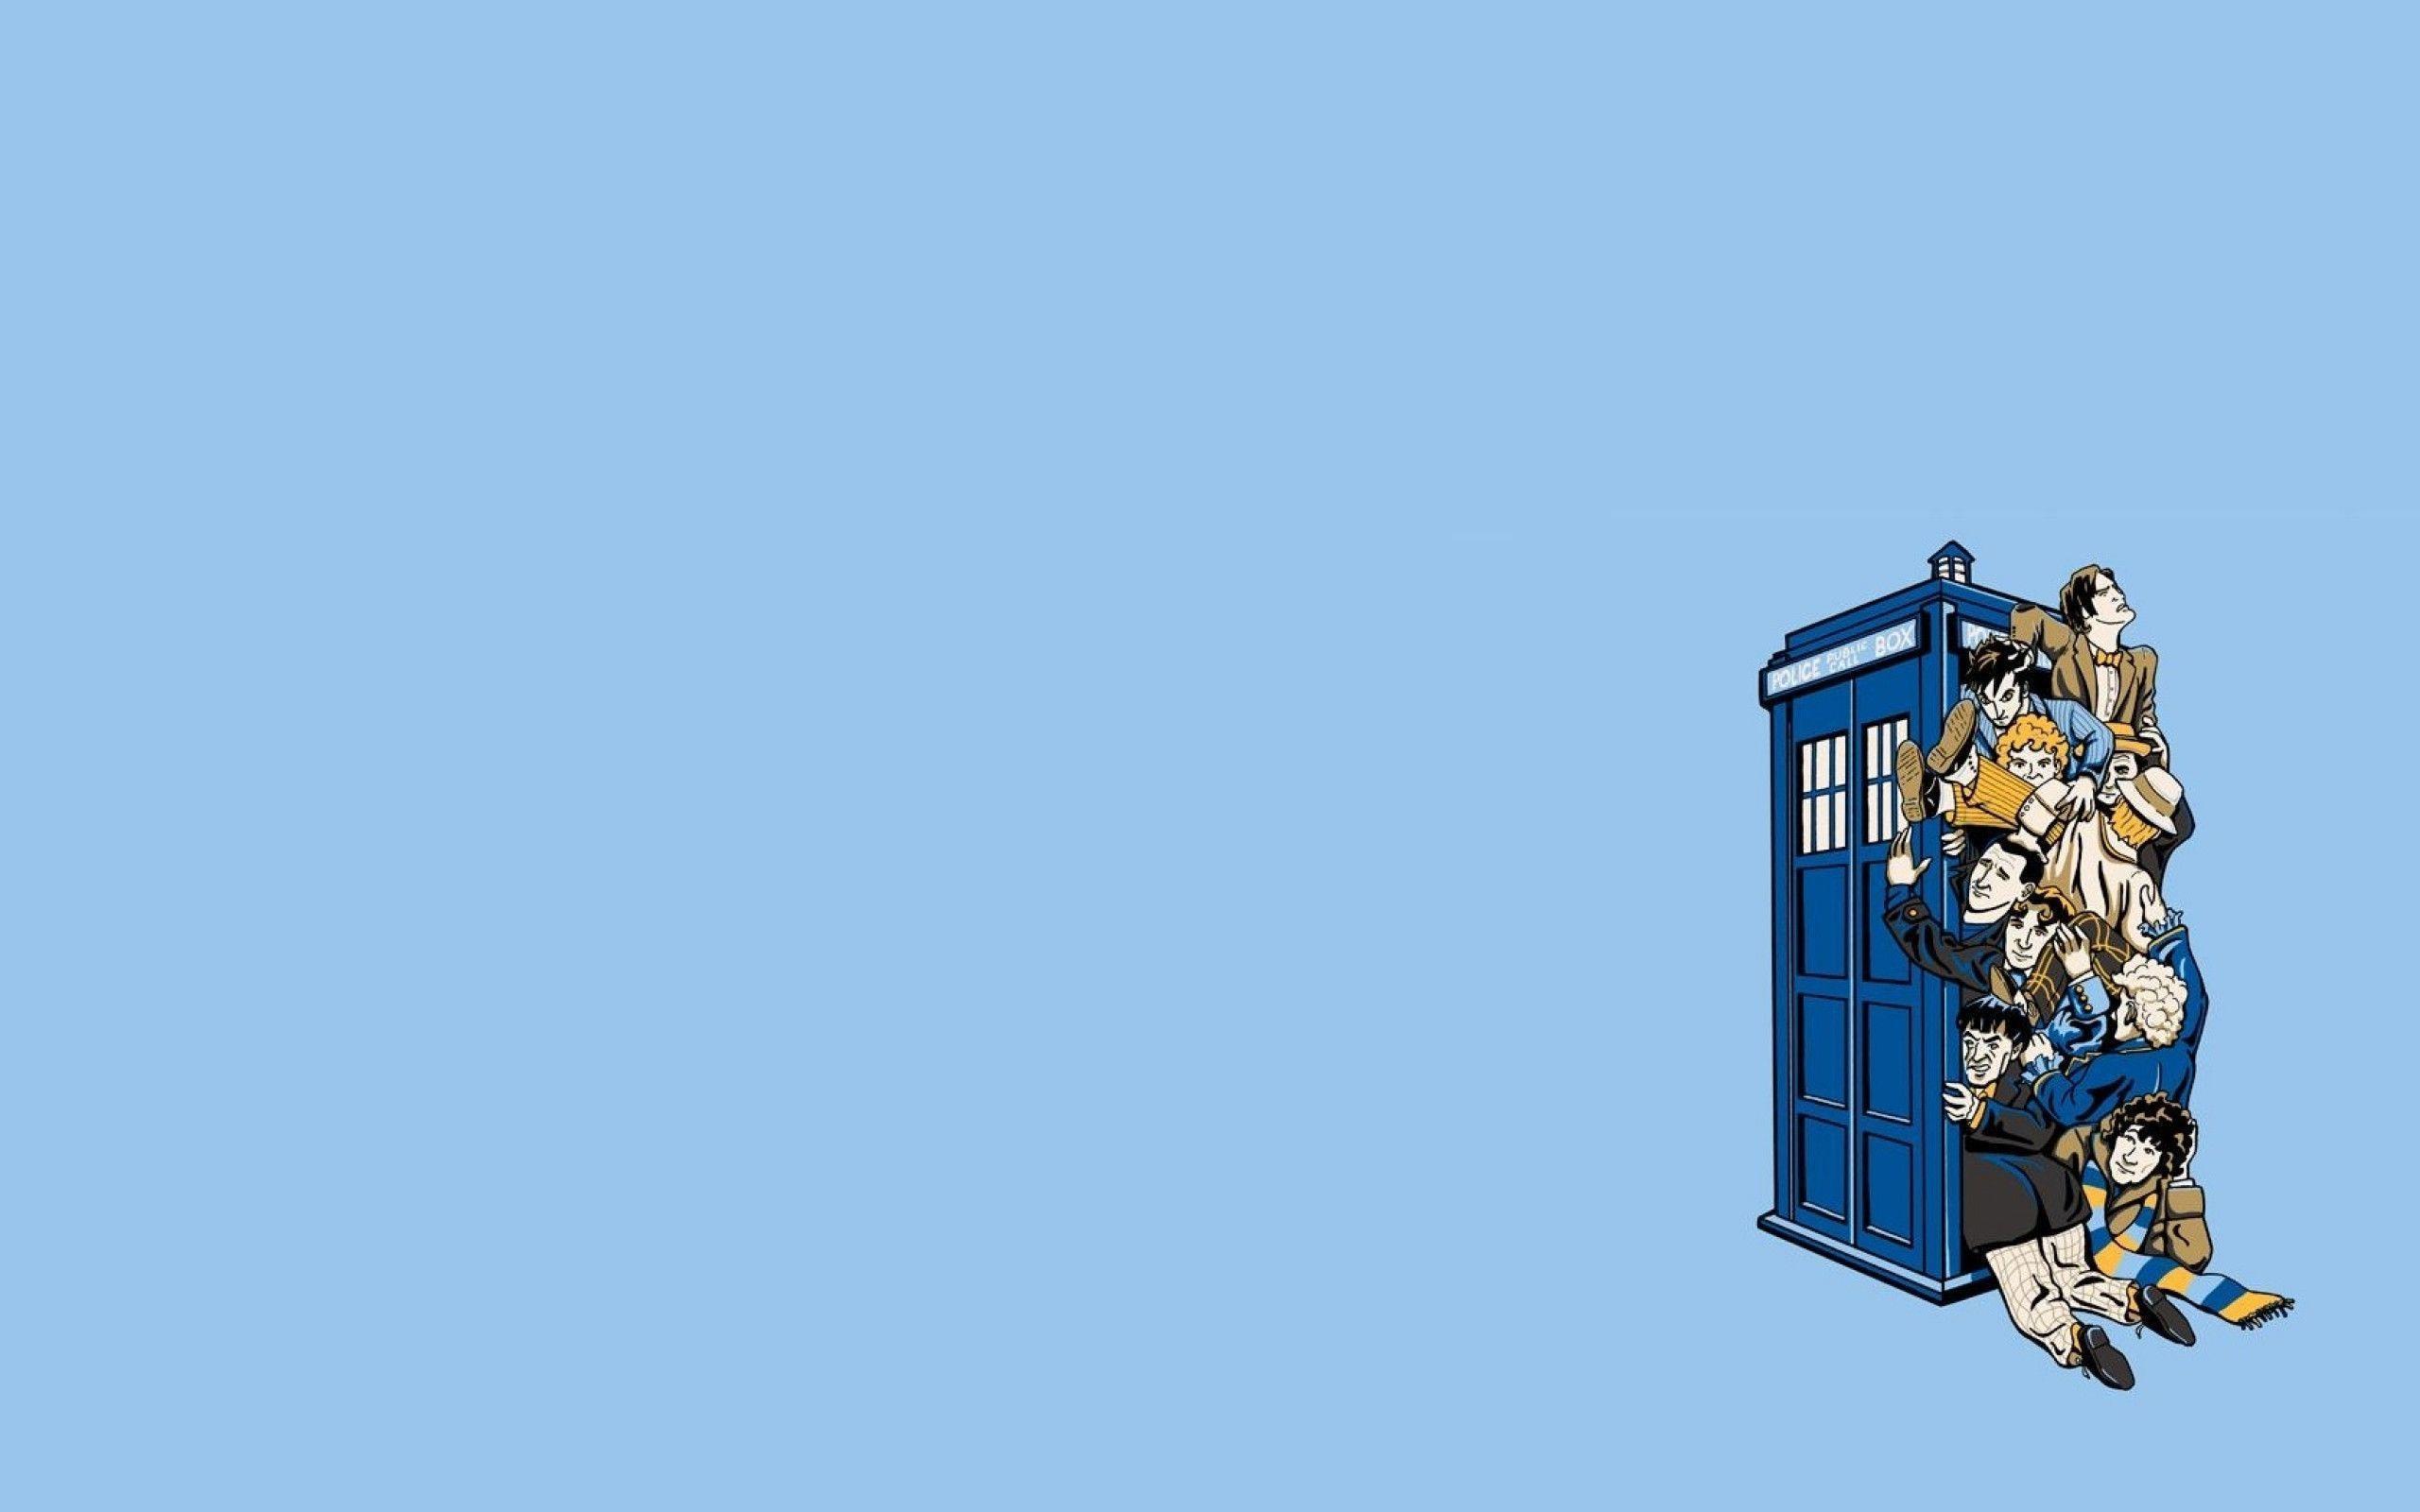 5cGoGkXcx doctor who wallpaper HD free wallpaper background